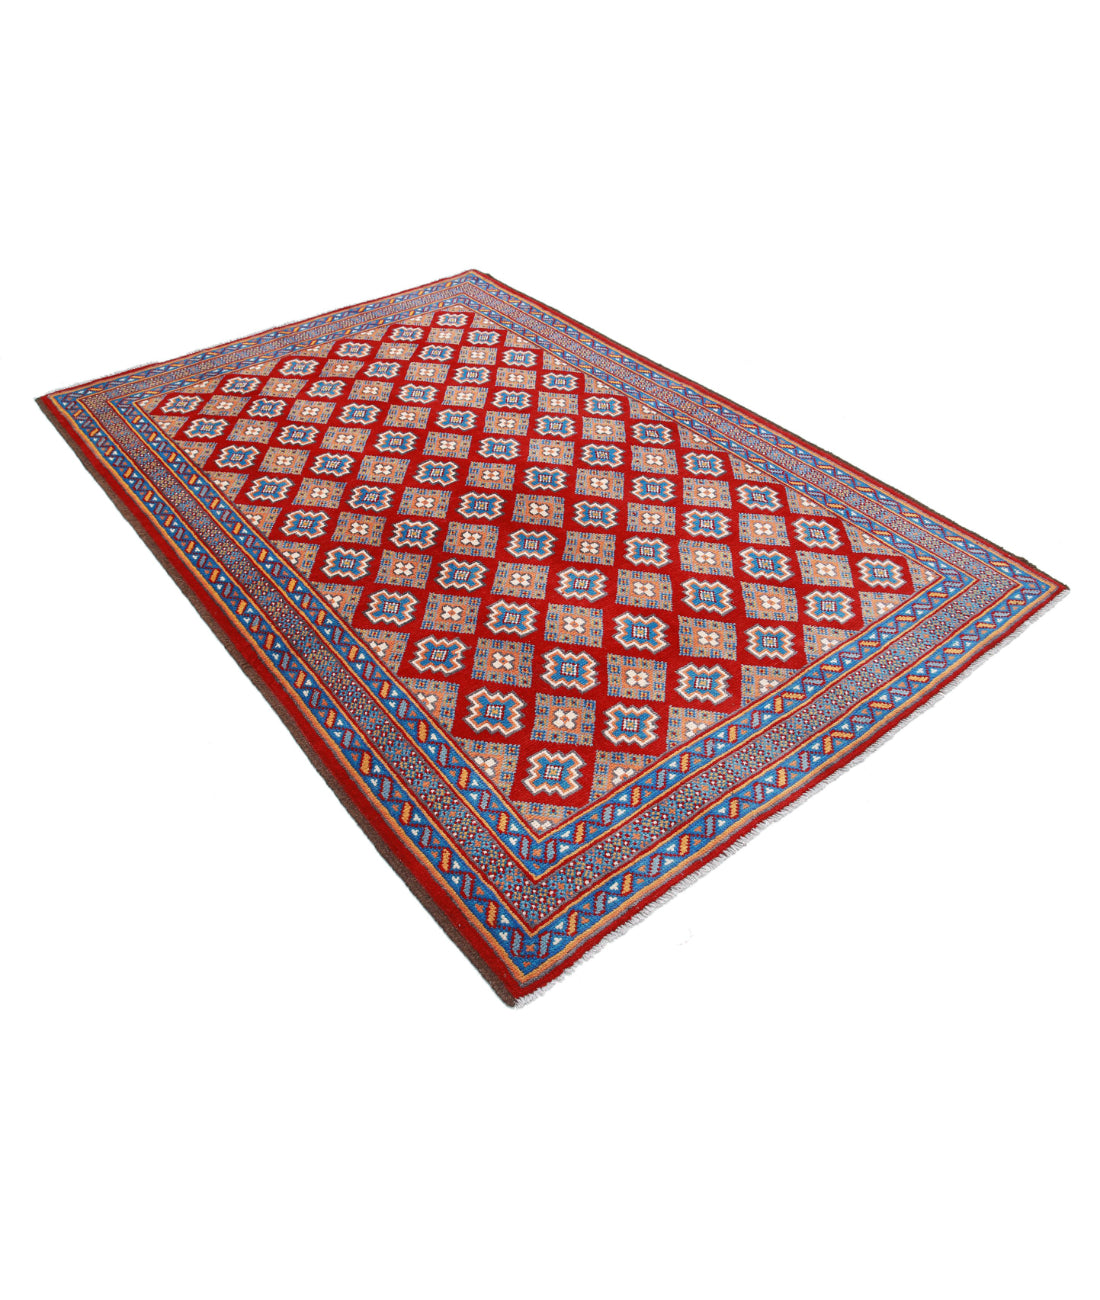 Revival 5'5'' X 7'10'' Hand-Knotted Wool Rug 5'5'' x 7'10'' (163 X 235) / Red / Blue